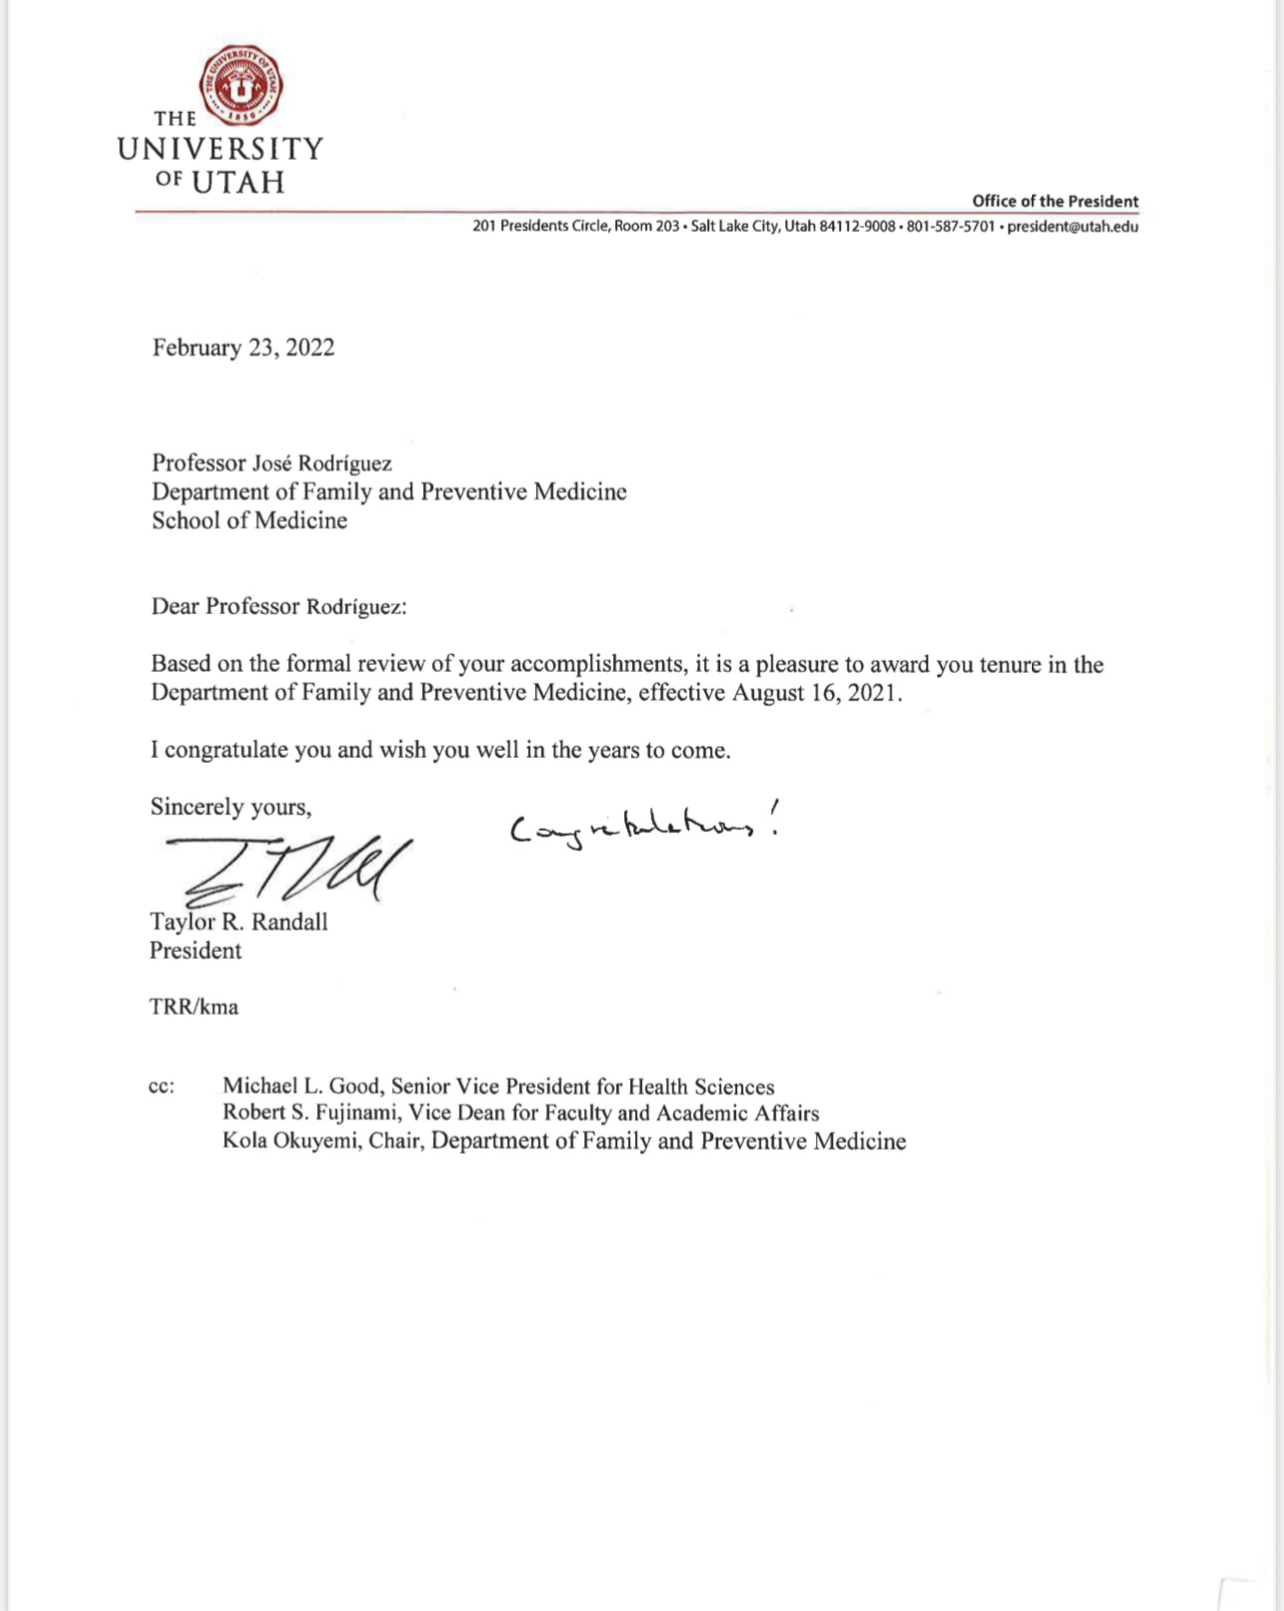 a screenshot of the tenure letter Dr. Rodriguez received